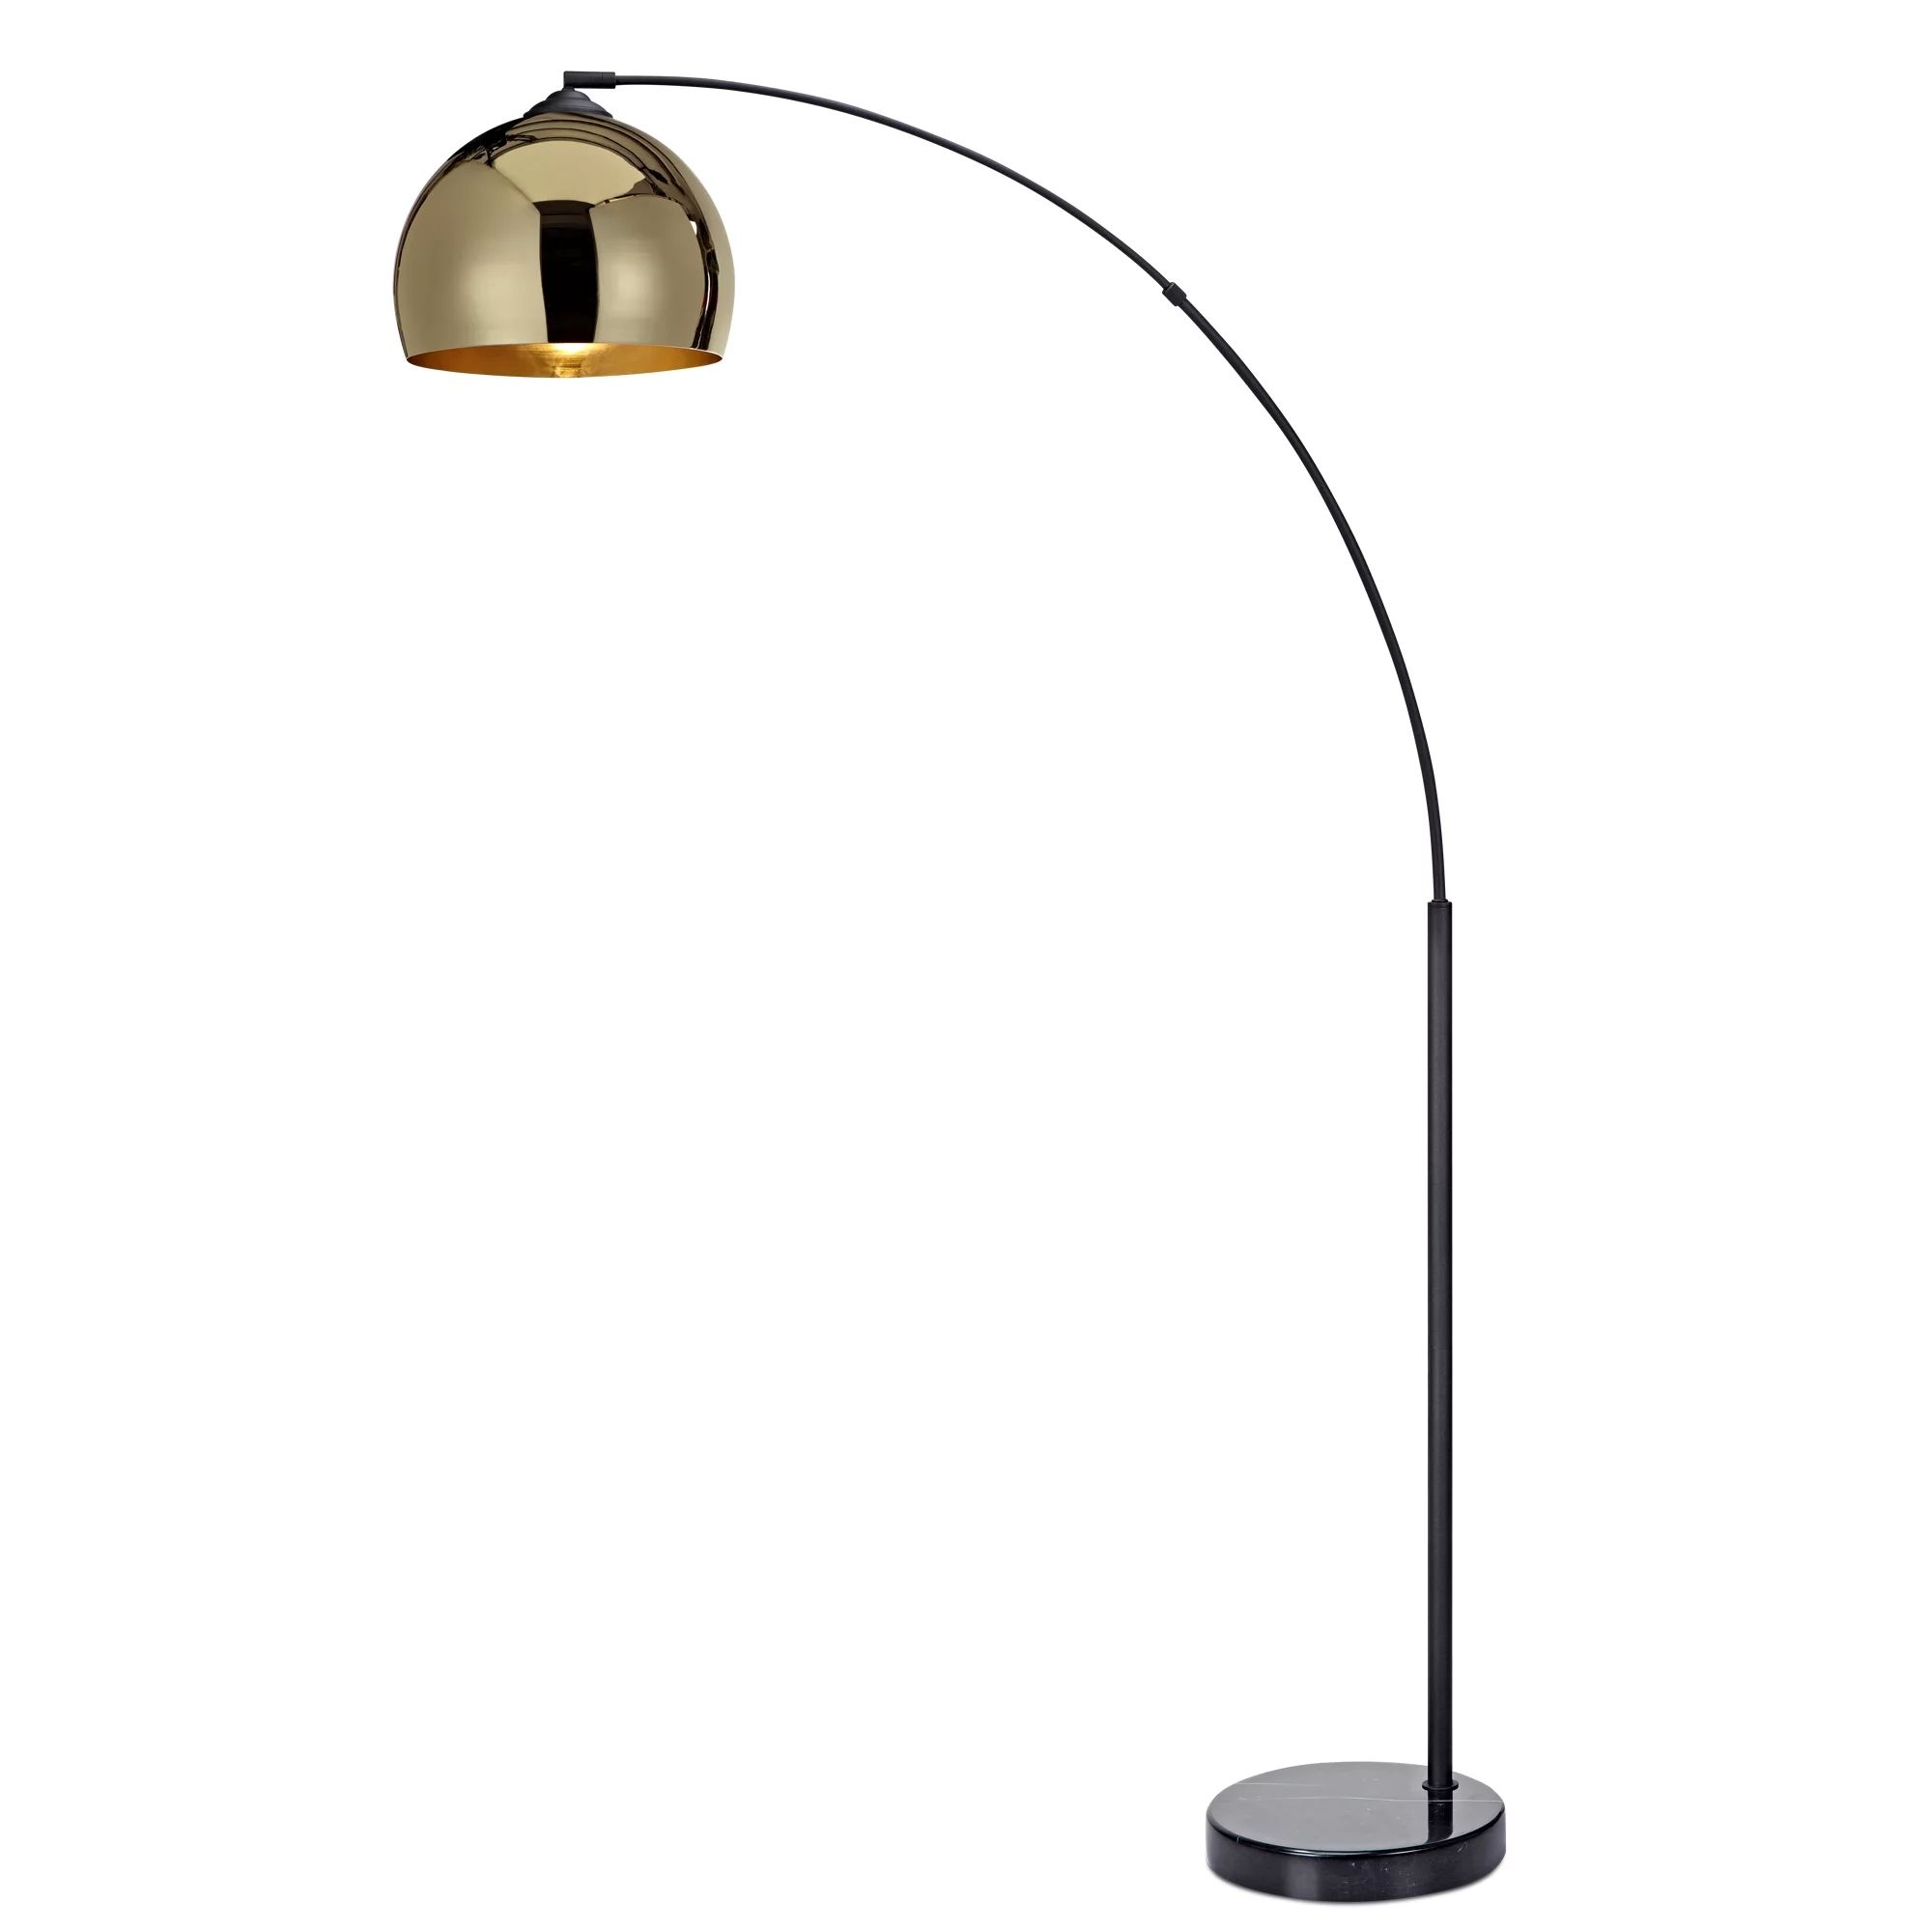 Teamson Home Arquer Arc 66.93" Metal Floor Lamp with Bell Shade, Gold | Walmart (US)